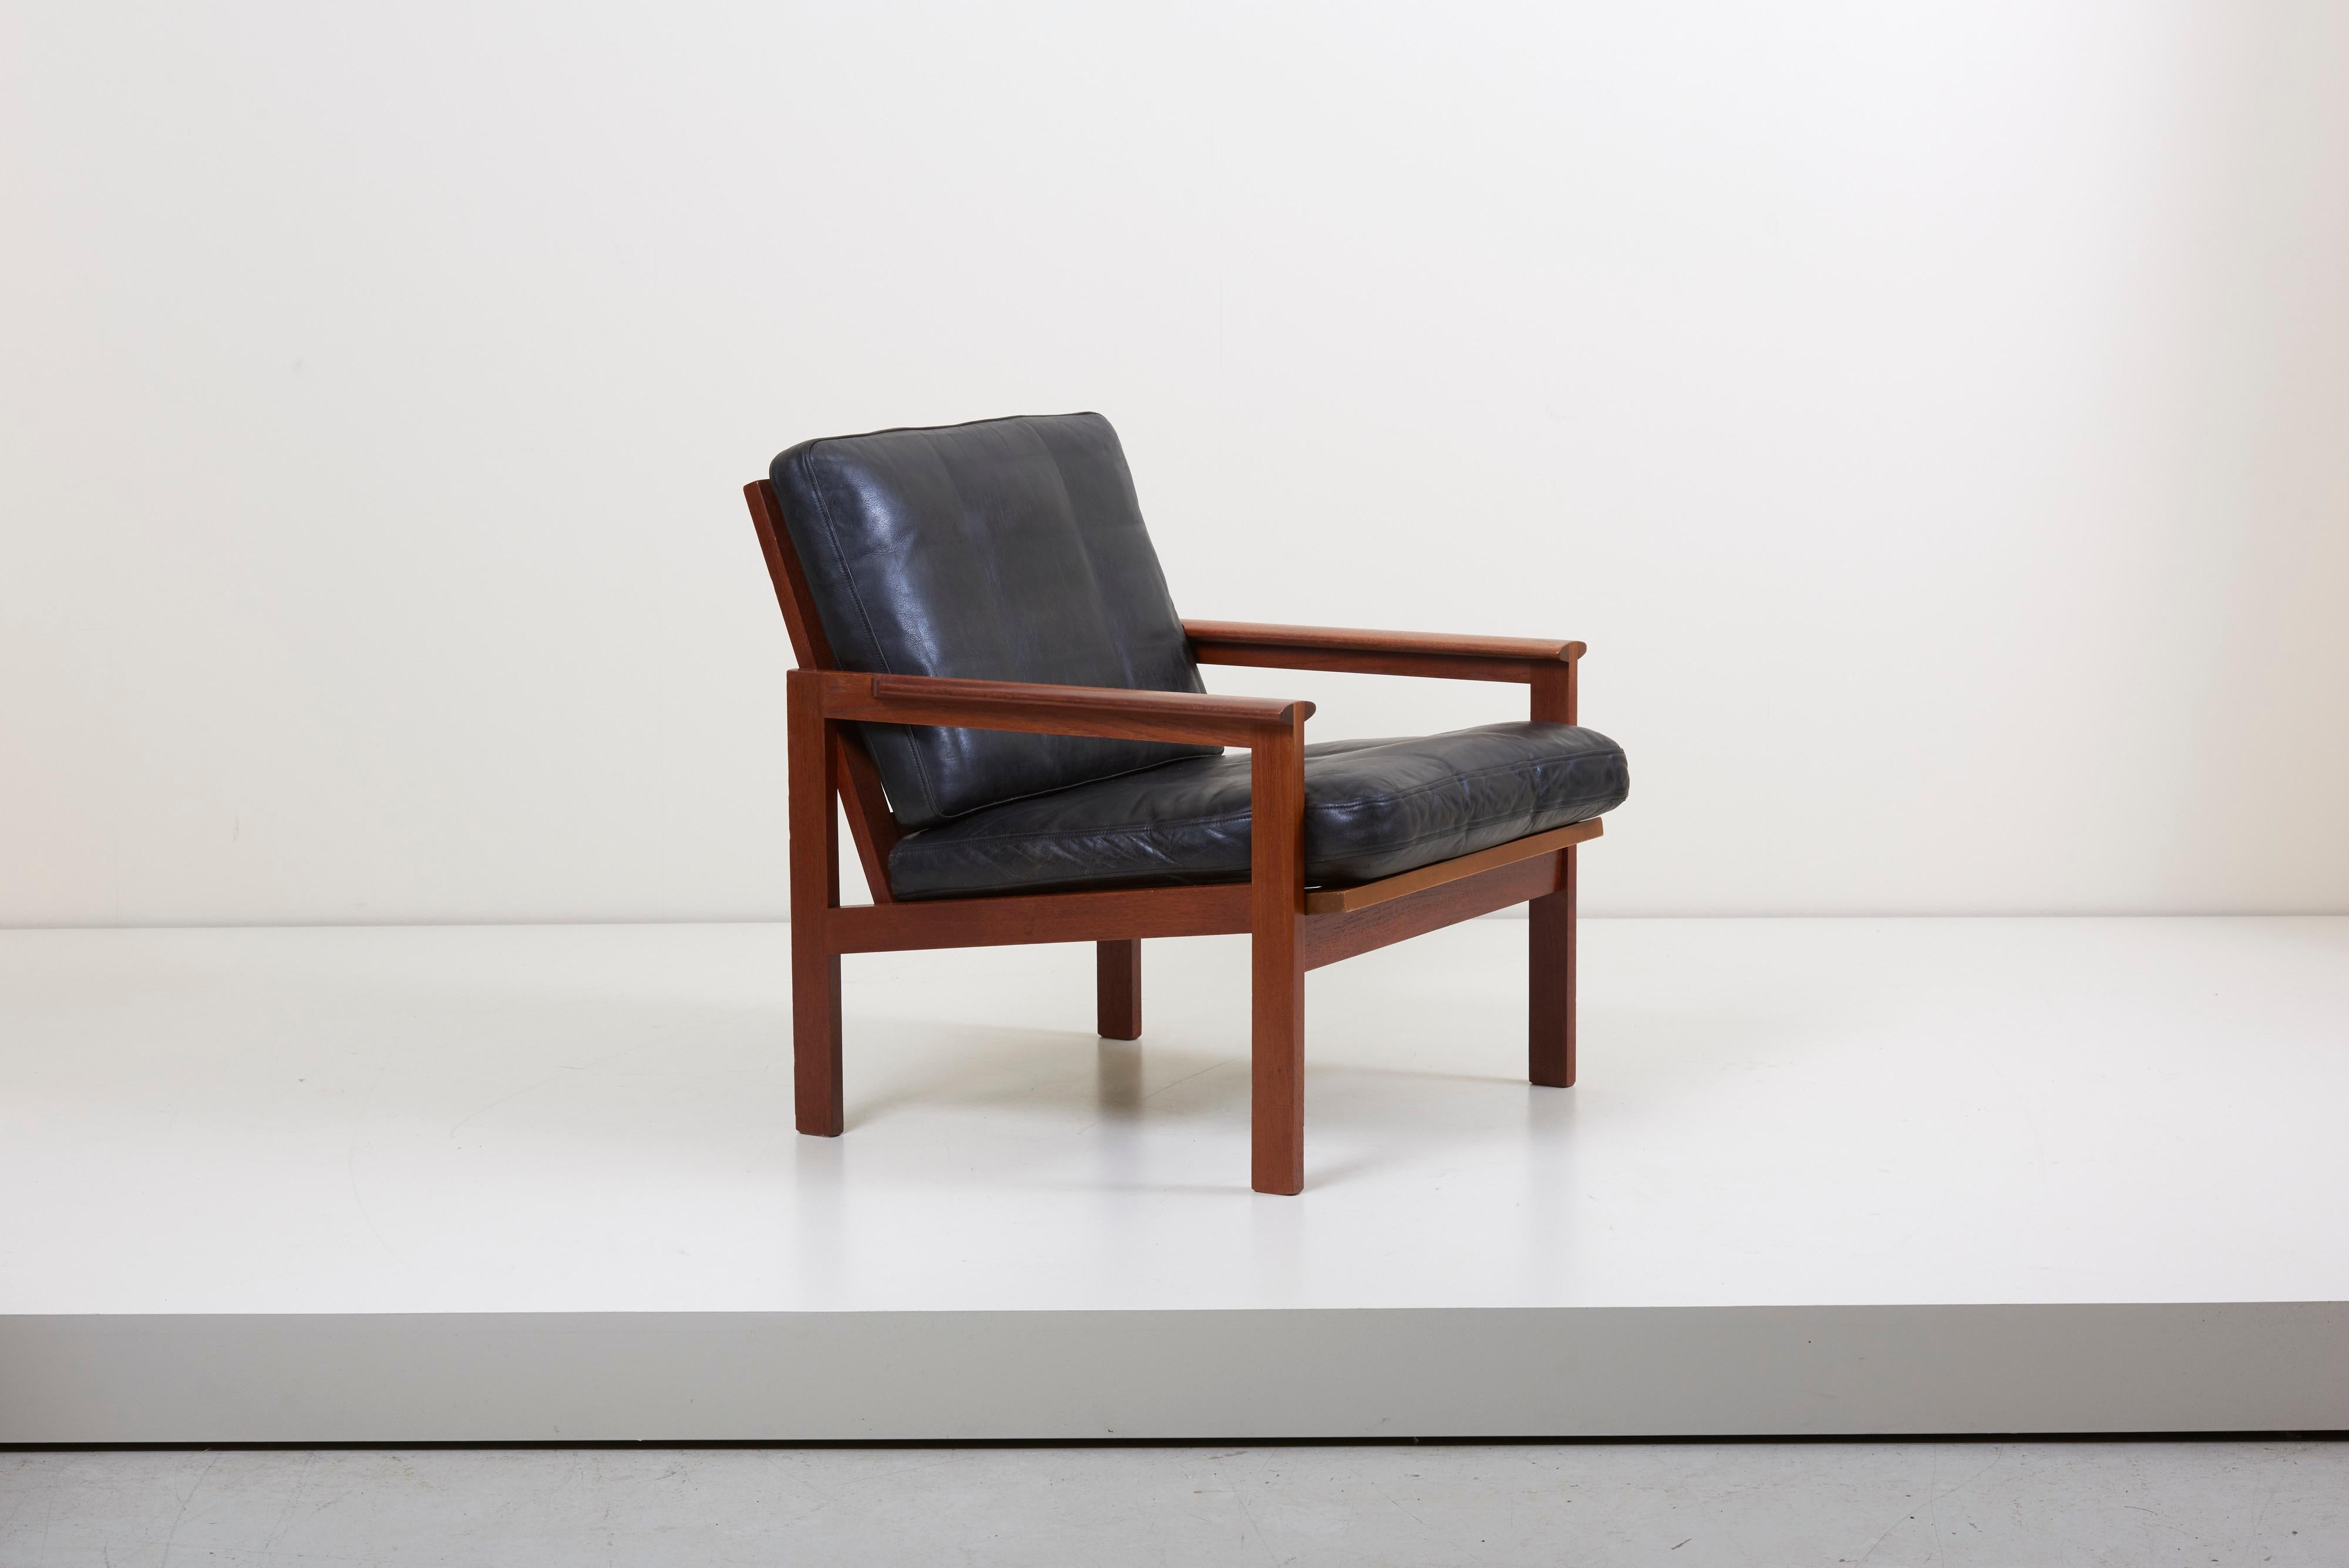 Scandinavian Modern Pair of Lounge Chairs in Teak and Leather by Danish Architect Illum Wikkelsø